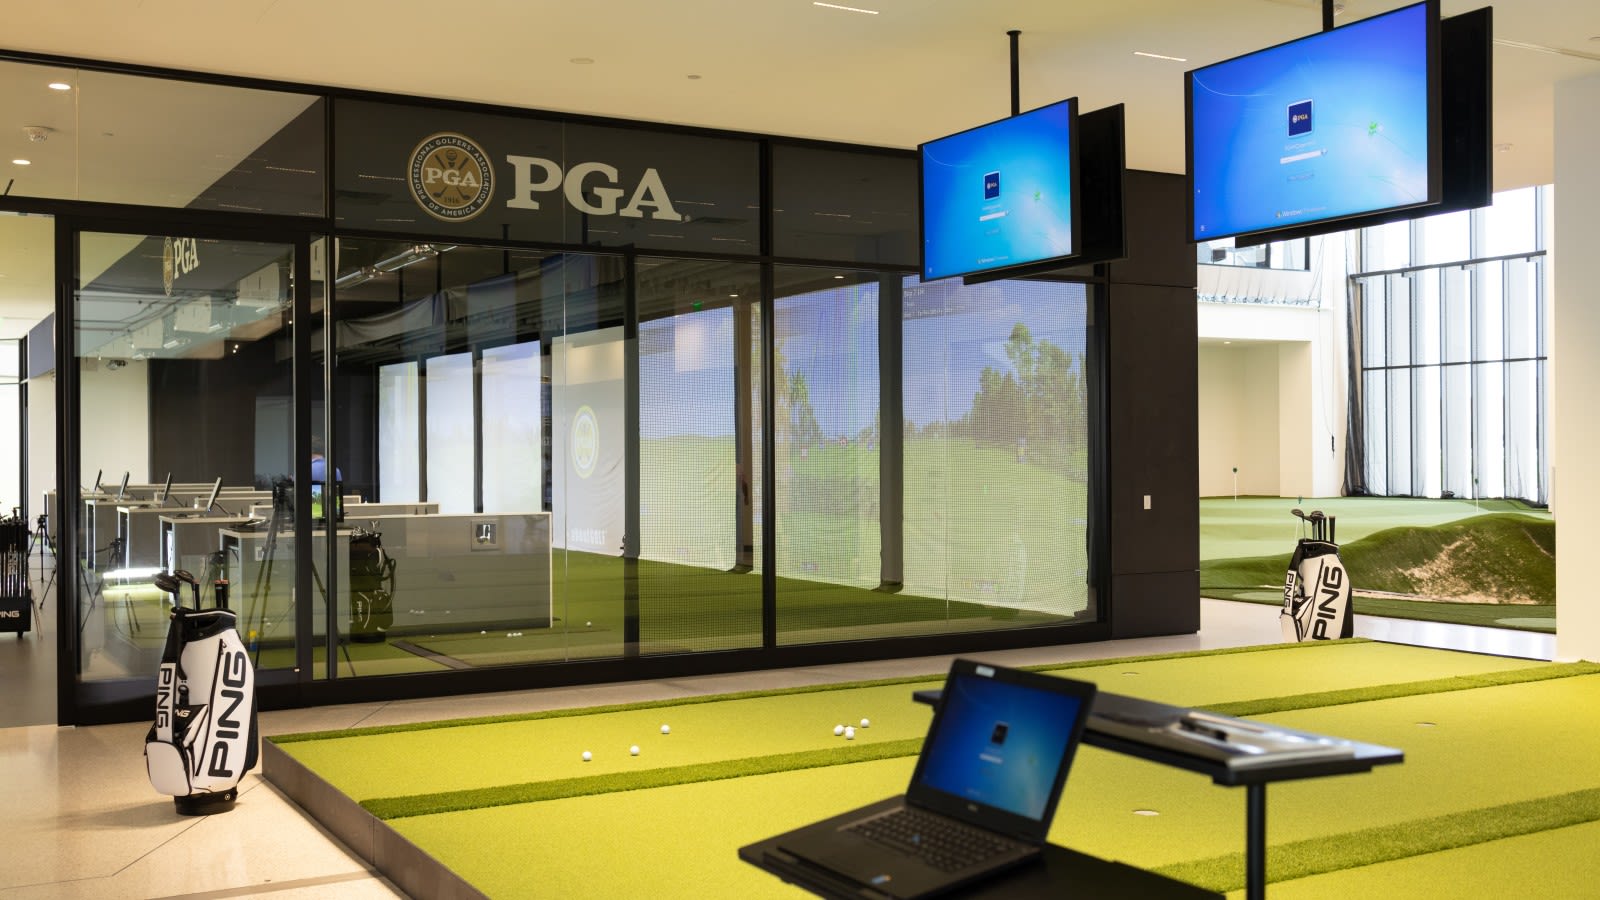 The Professional Development Center at the Home of the PGA of America will host Summit events.